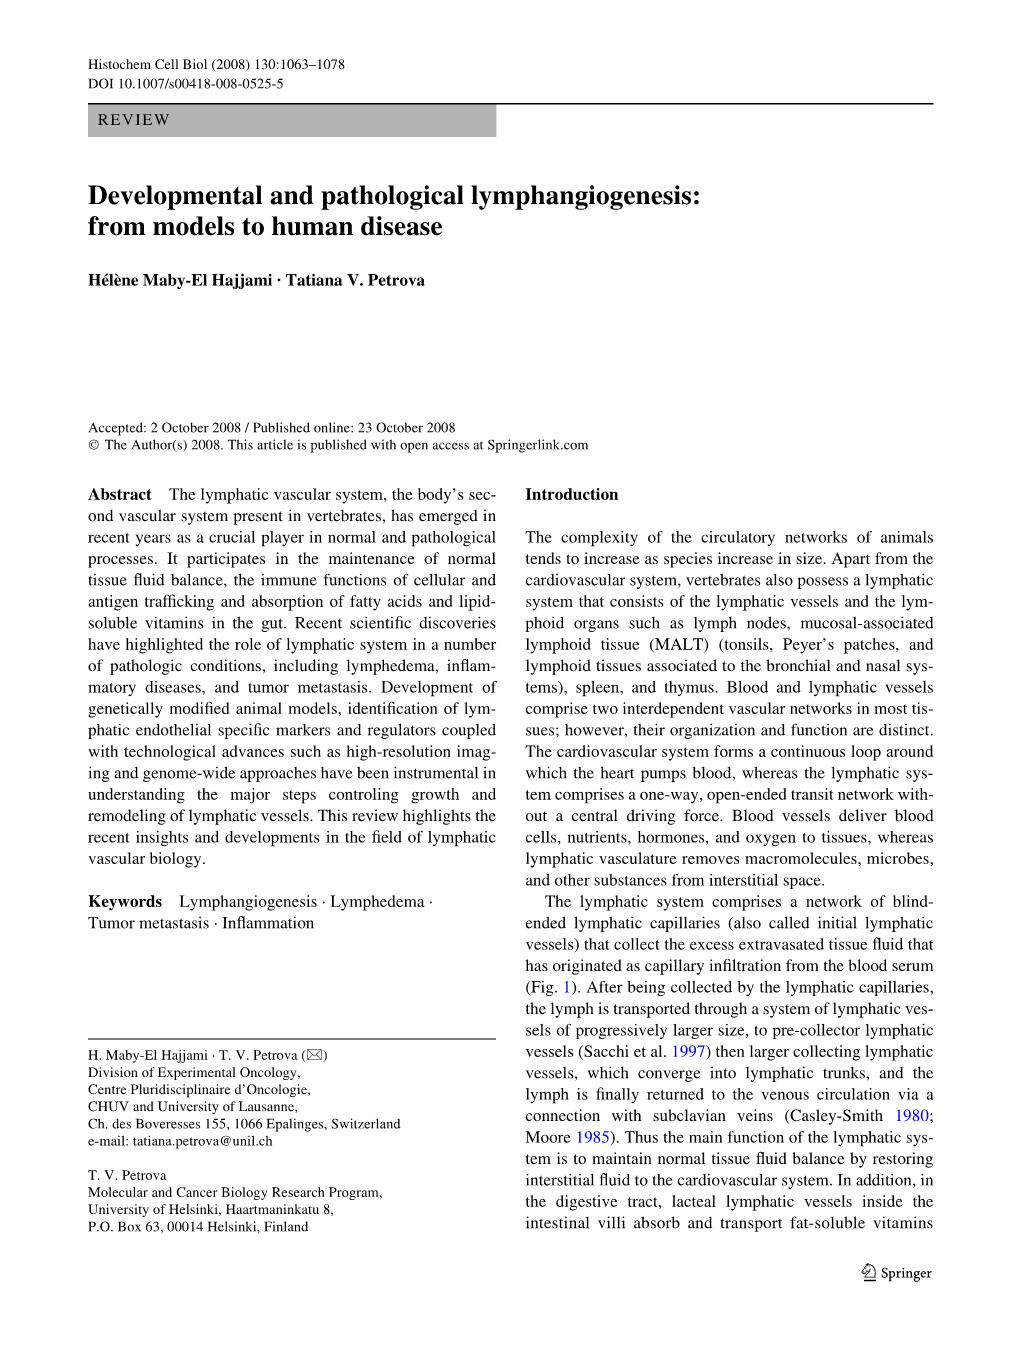 Developmental and Pathological Lymphangiogenesis: from Models to Human Disease